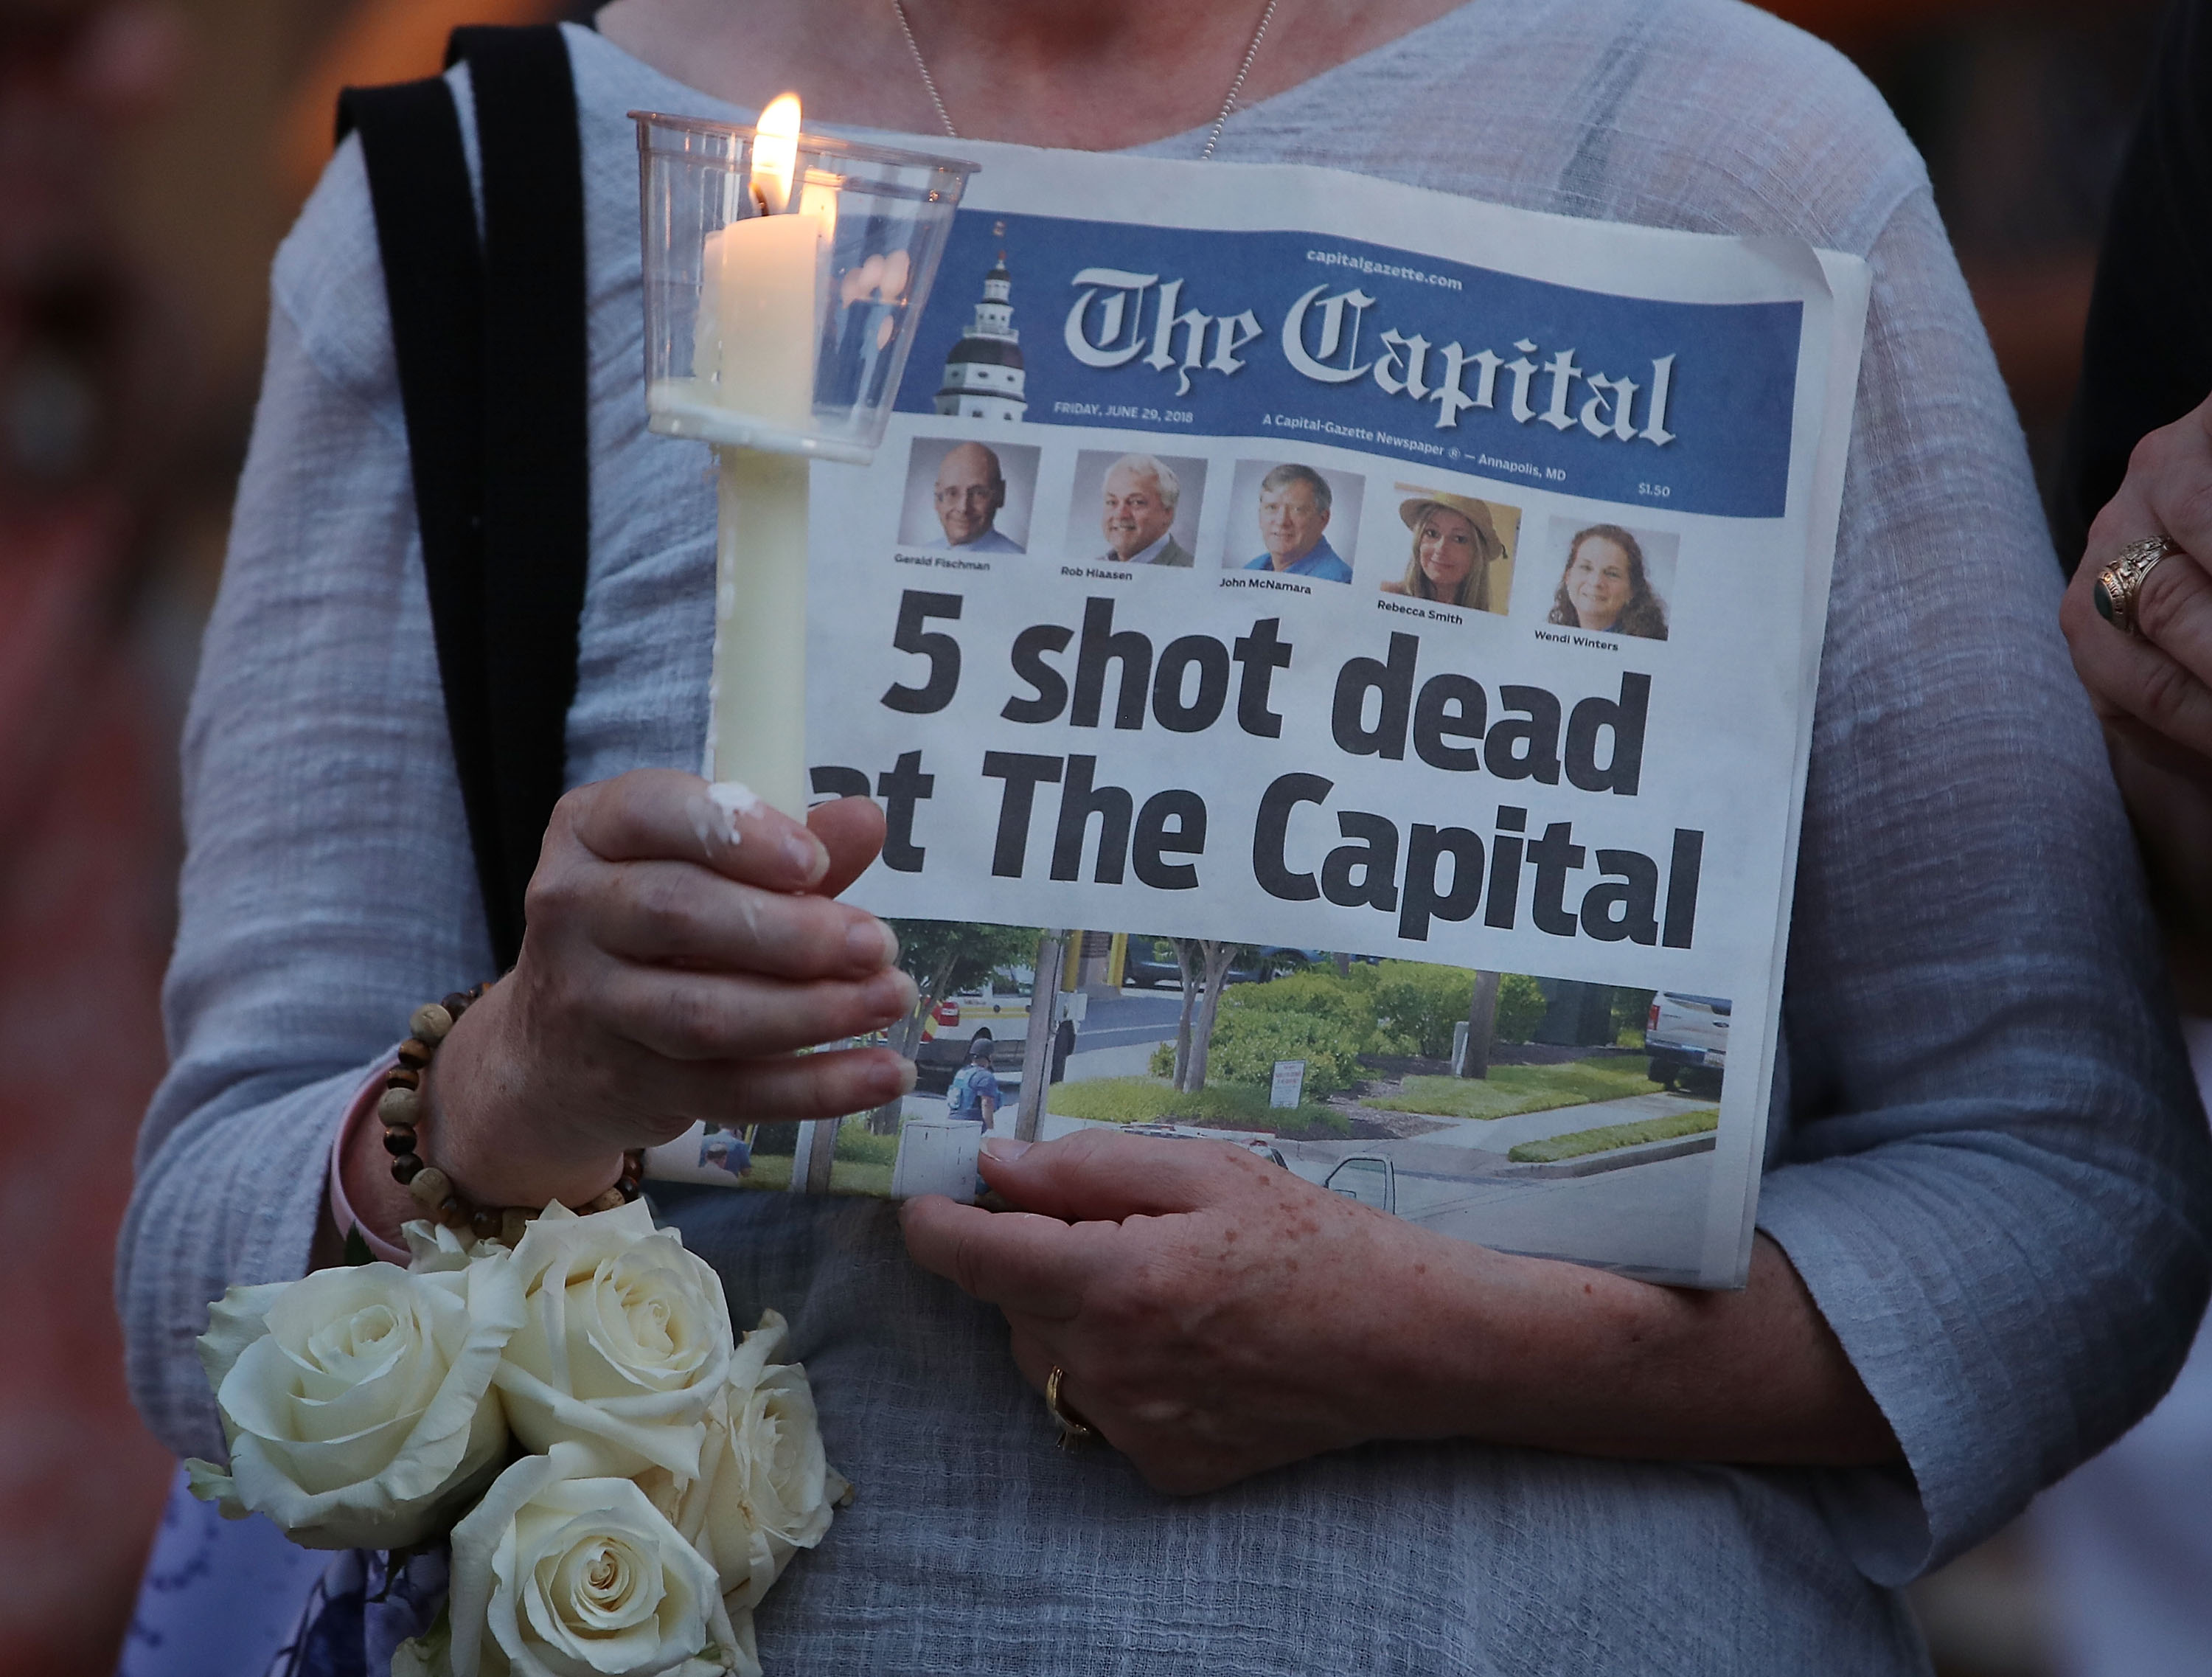 A women holds today's edition of the Capital Gazette newspaper during a candlelight vigil to honor the 5 people who were shot and killed yesterday, on June 29, 2018 in Annapolis, Maryland. (Mark Wilson&mdash;Getty Images)